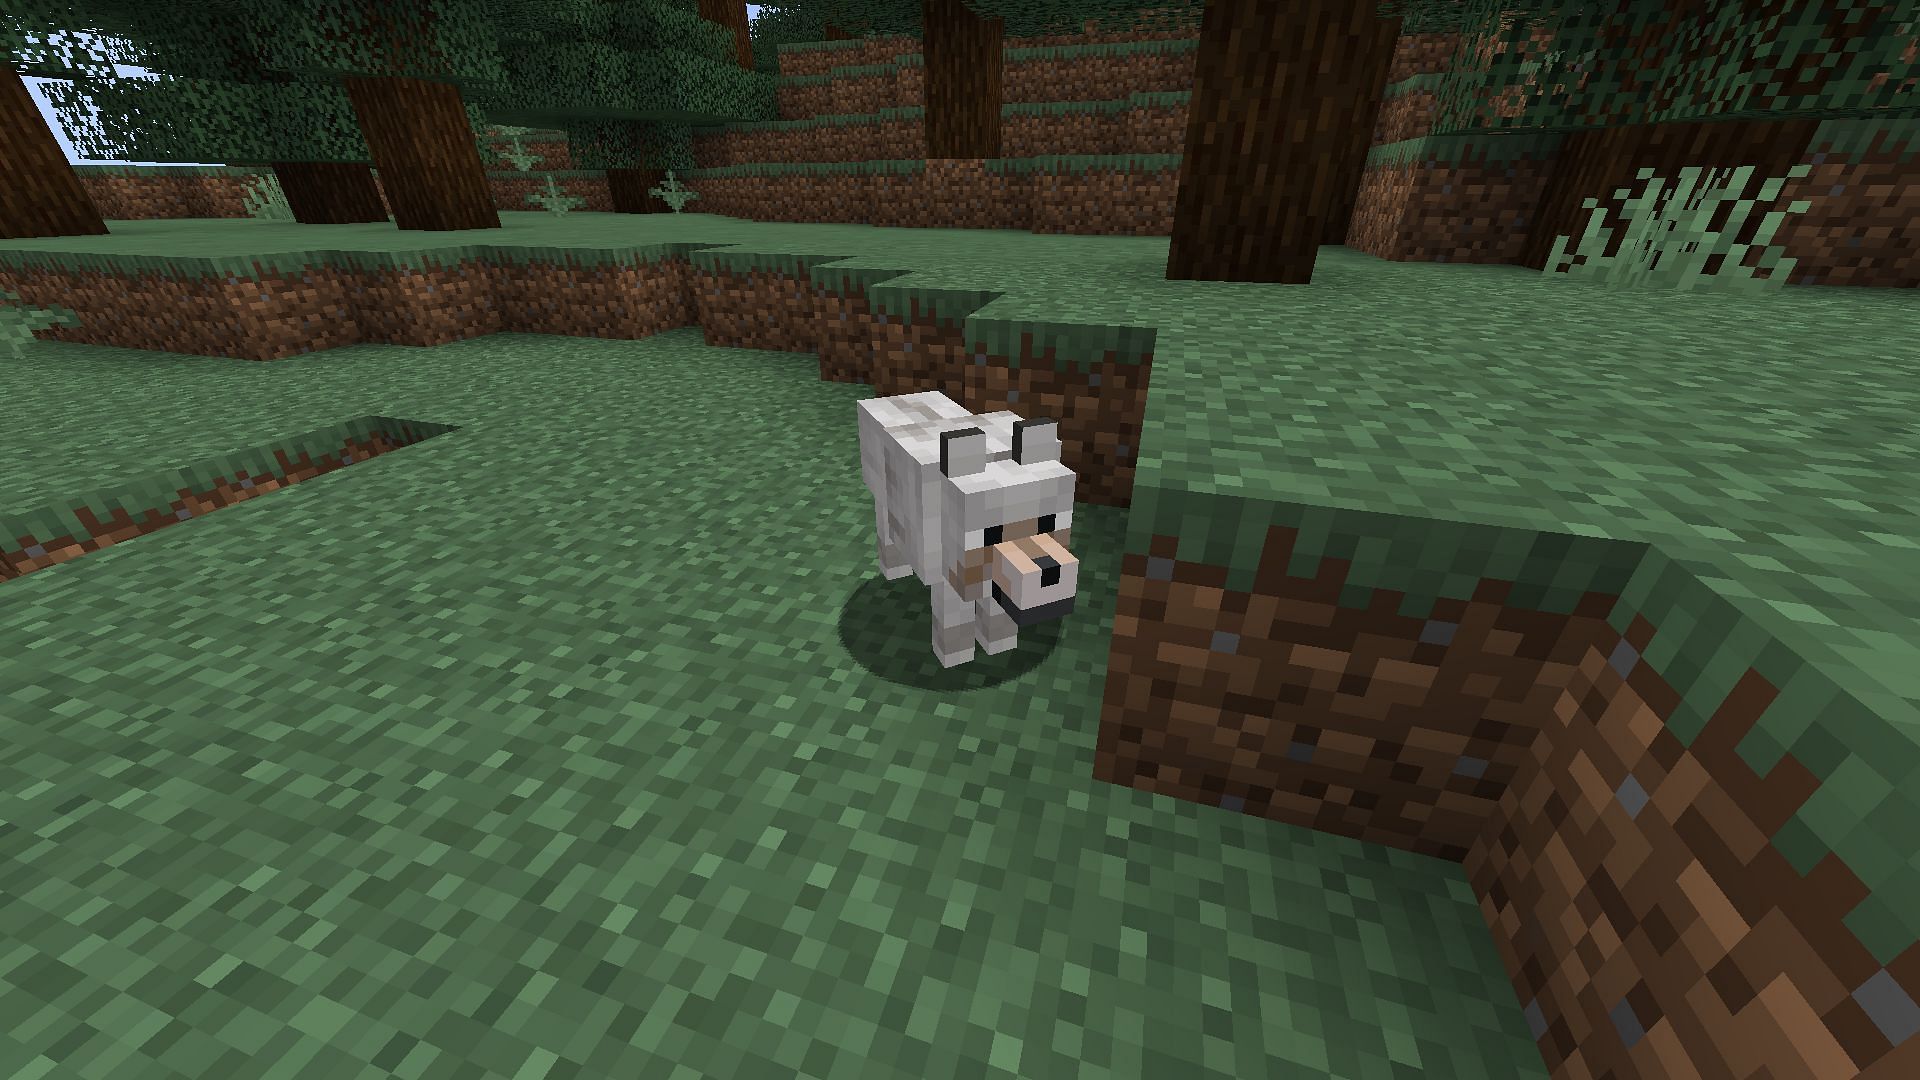 Wolf is an old mob that is still considered cute in Minecraft (Image via Mojang)